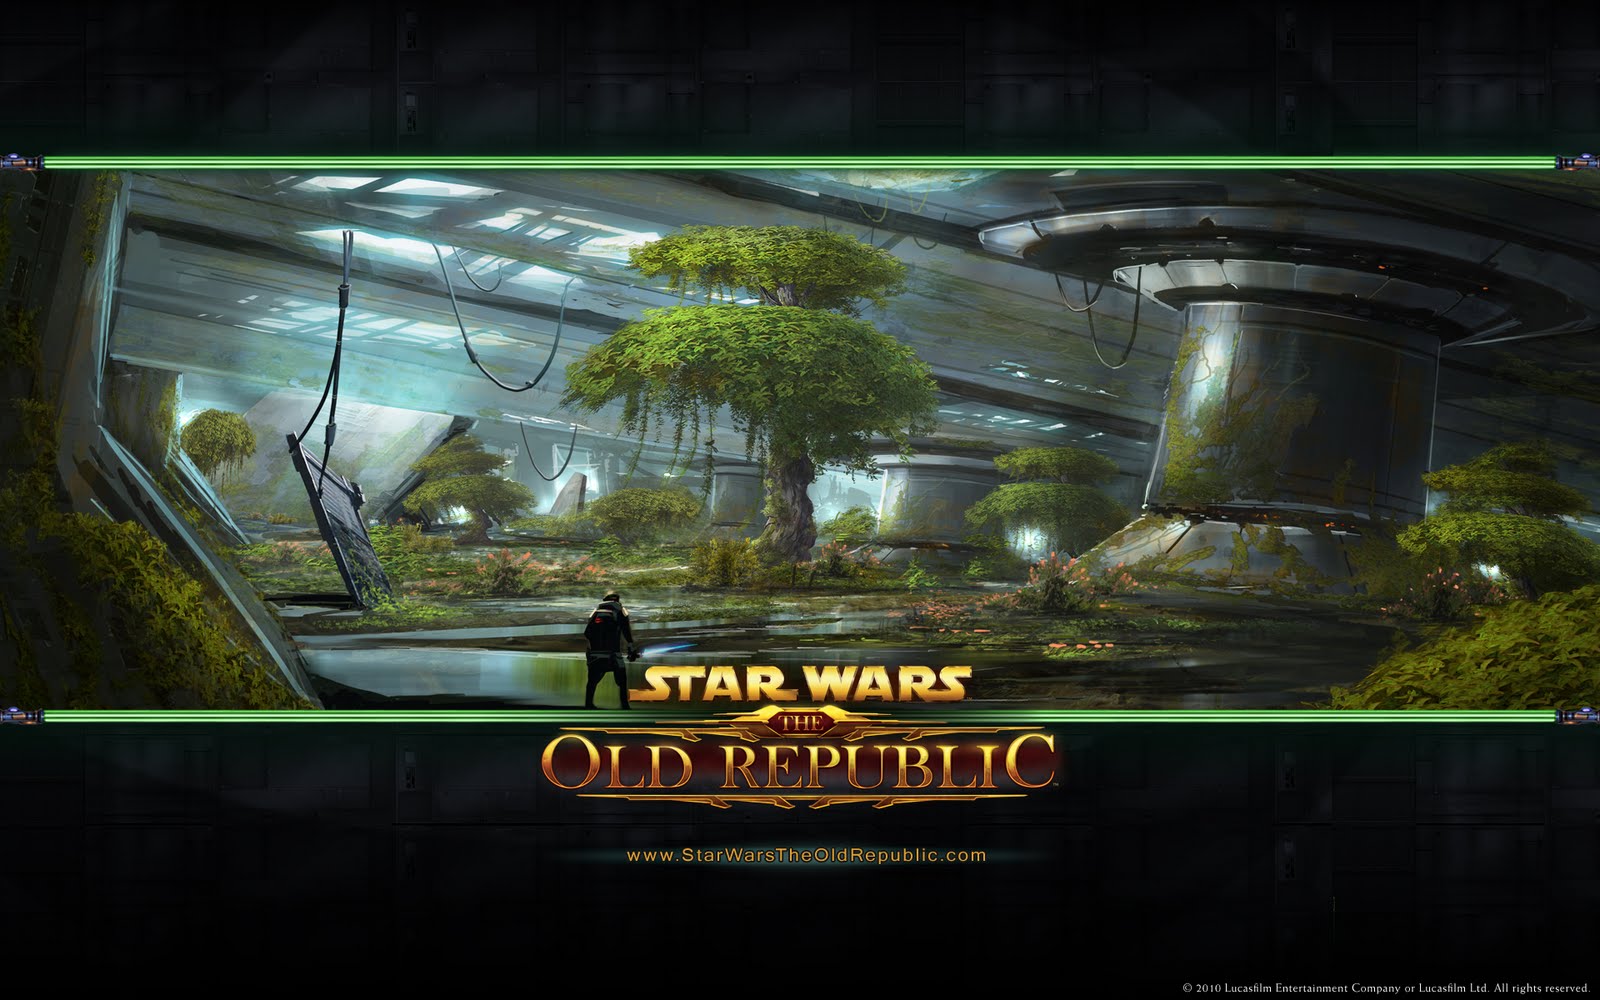 Star Wars The Old Republic Wallpaper Collection I Hd HD Wallpapers Download Free Map Images Wallpaper [wallpaper376.blogspot.com]